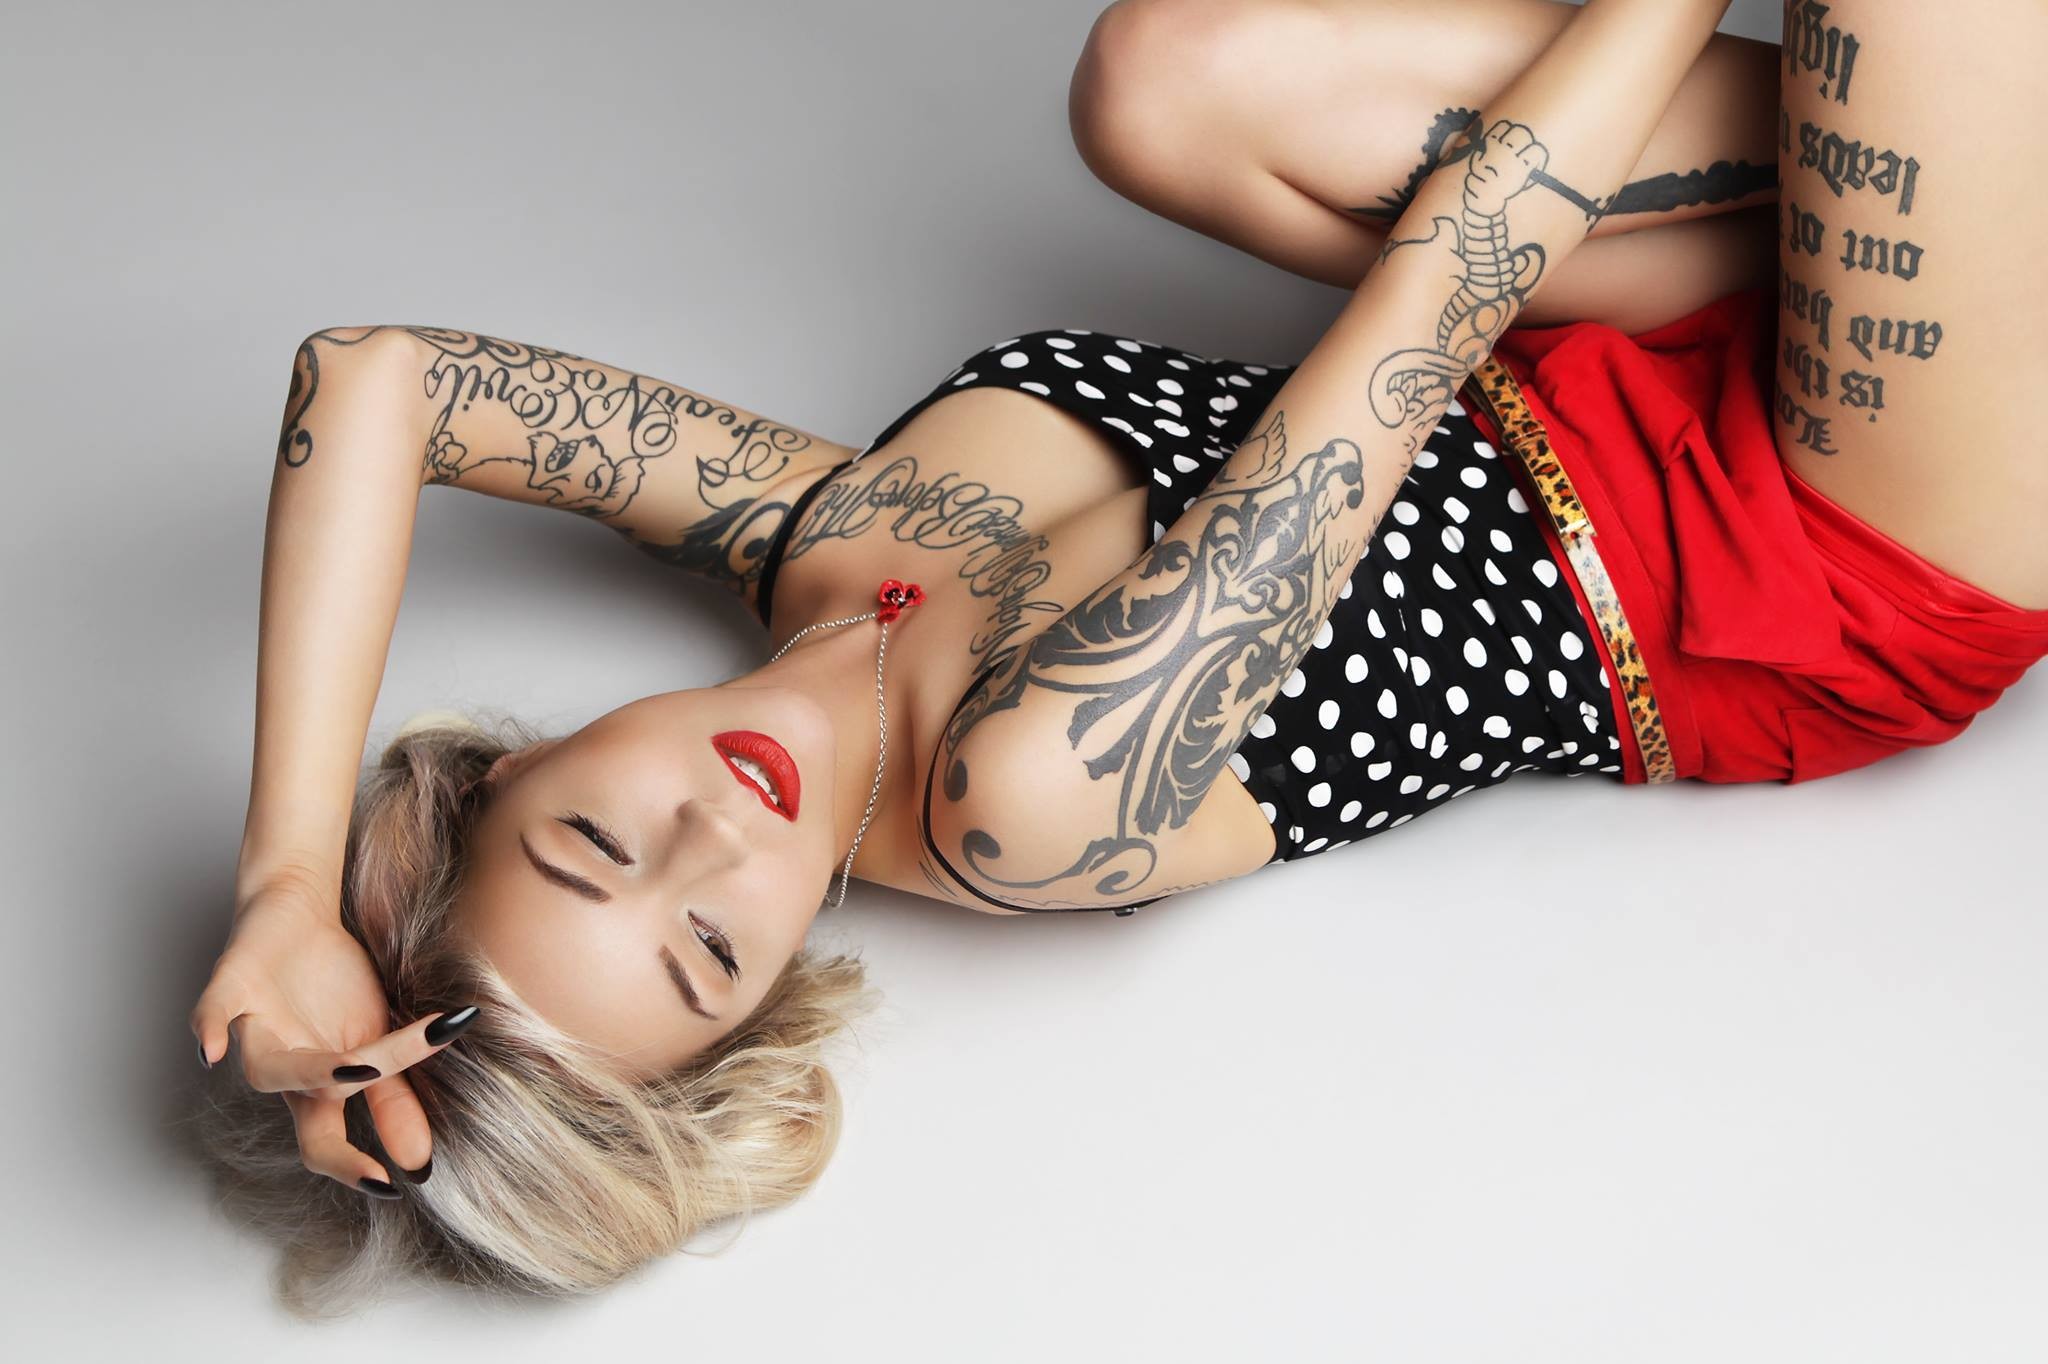 People 2048x1364 women Sara Fabel blonde tattoo on the floor necklace painted nails red lipstick model women indoors inked girls lying on back studio